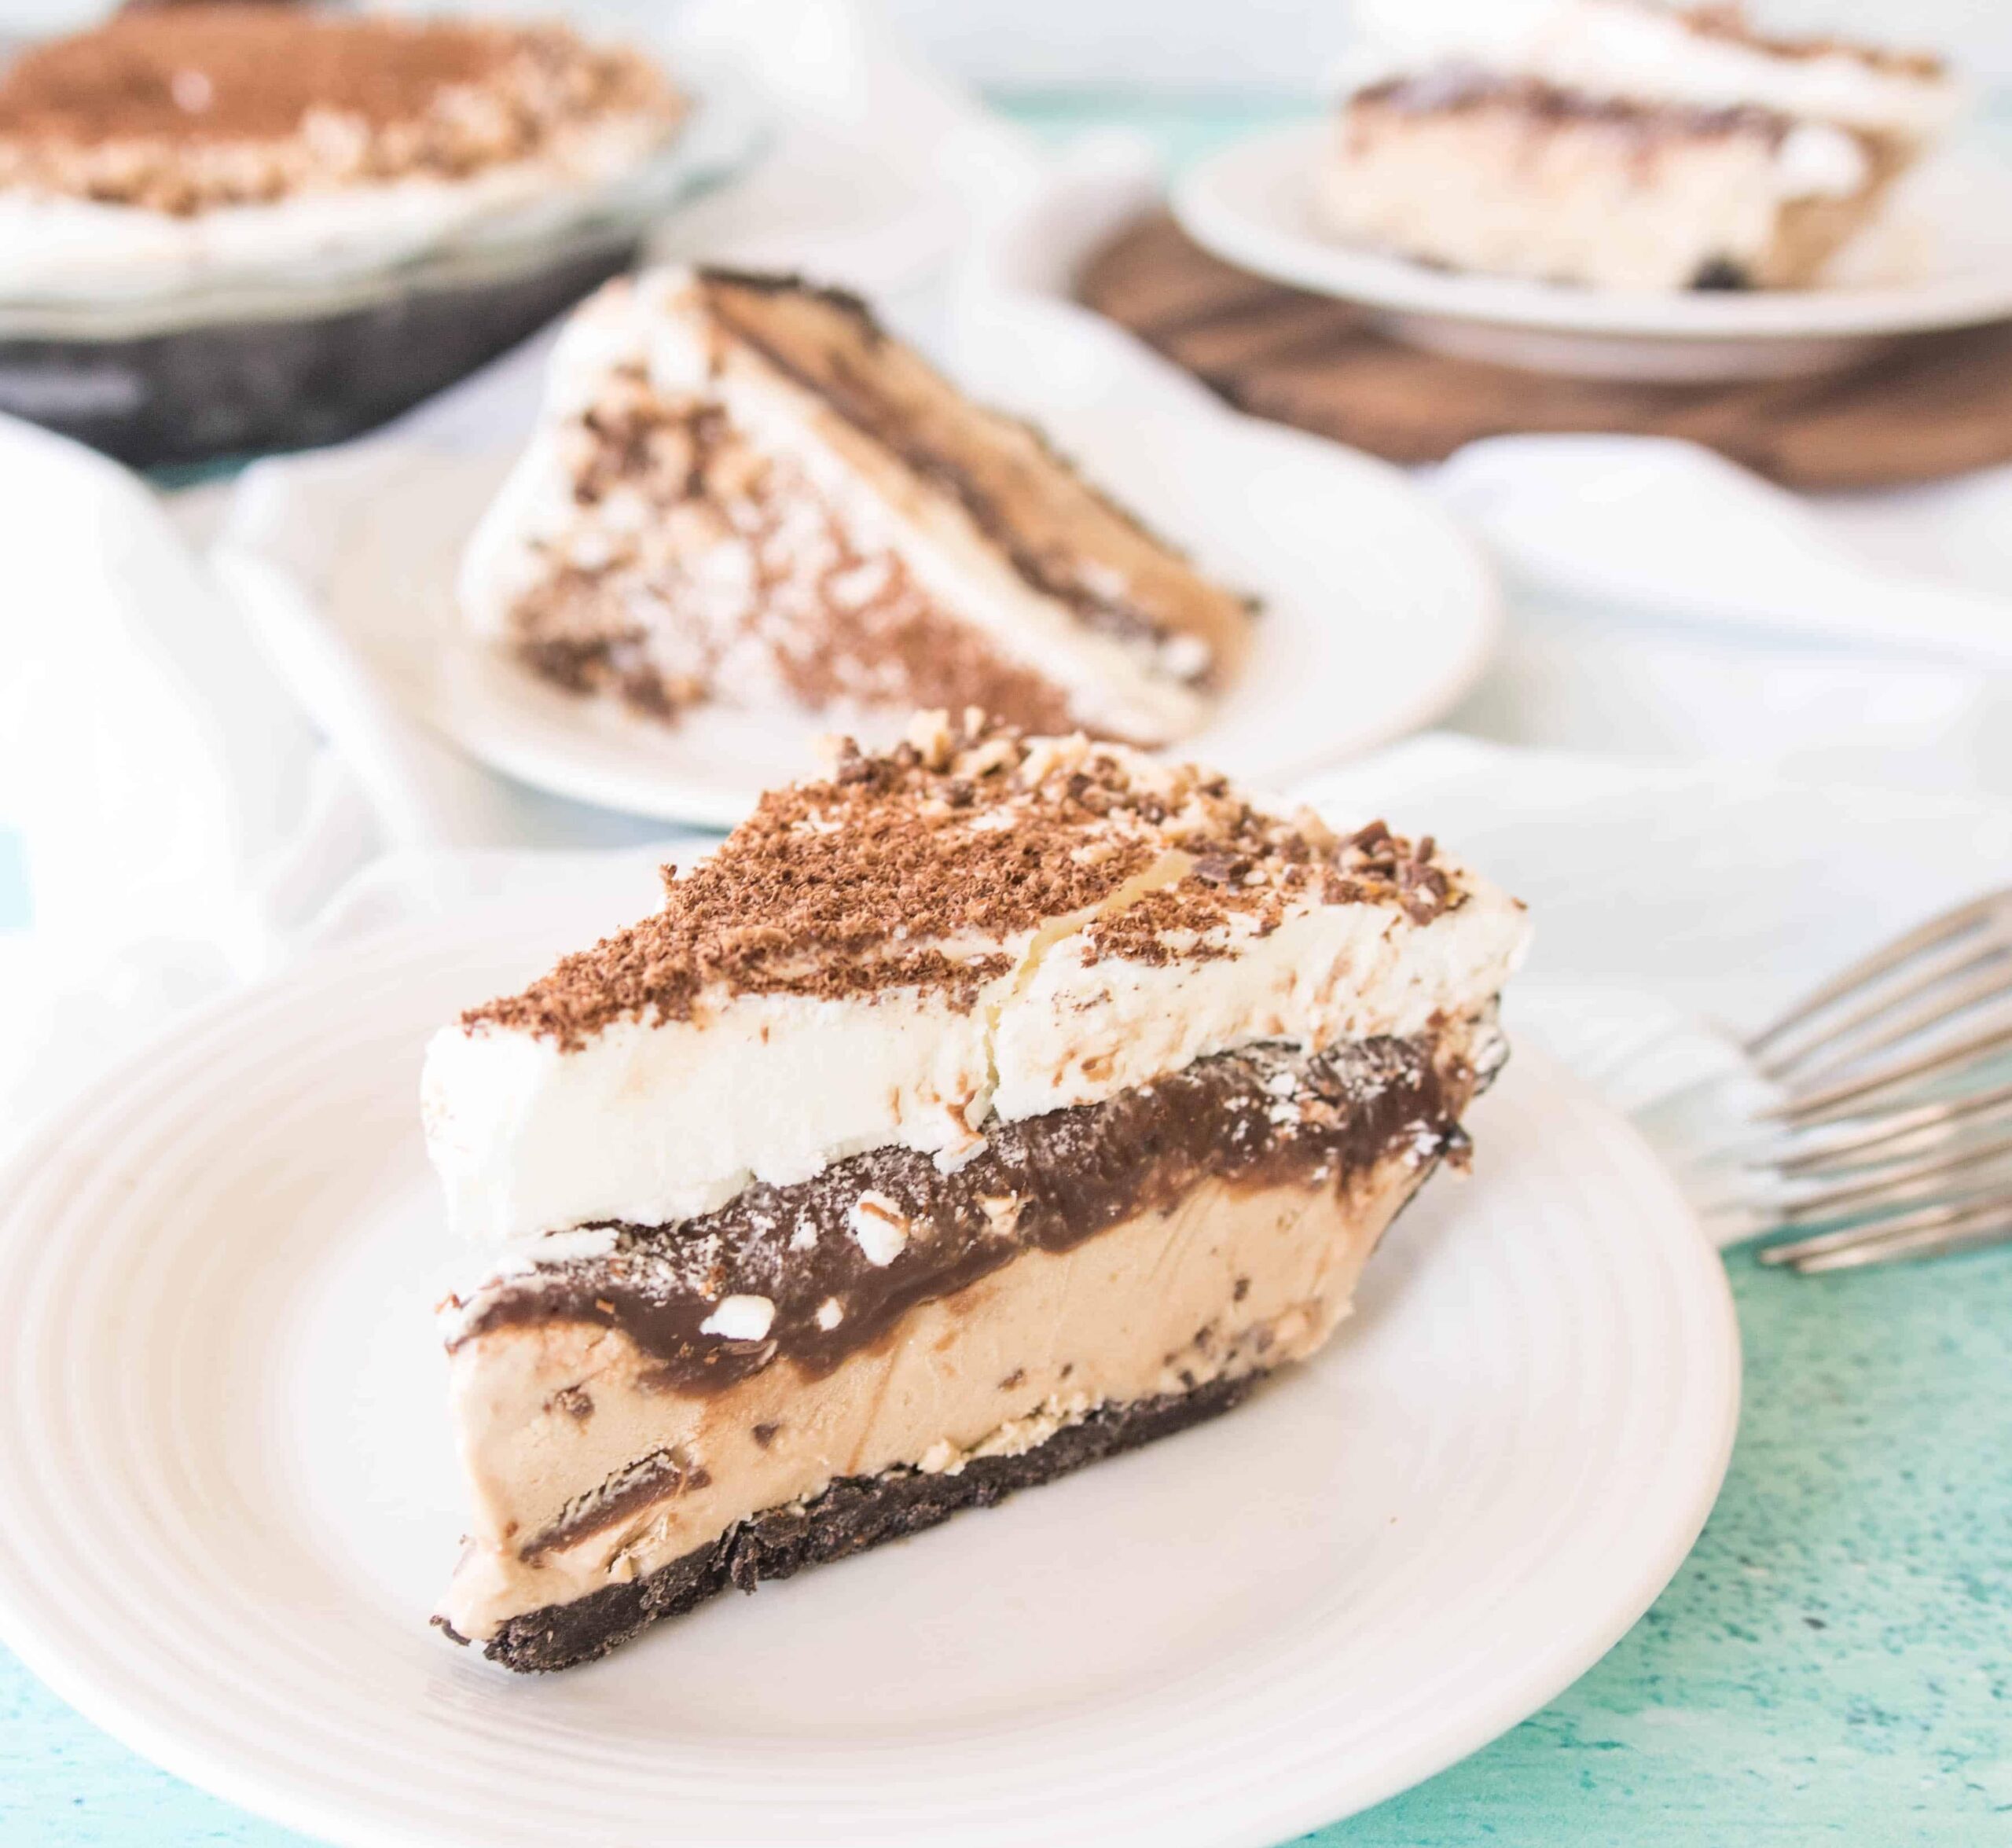  Give yourself a treat with this rich and indulgent coffee ice cream pie.